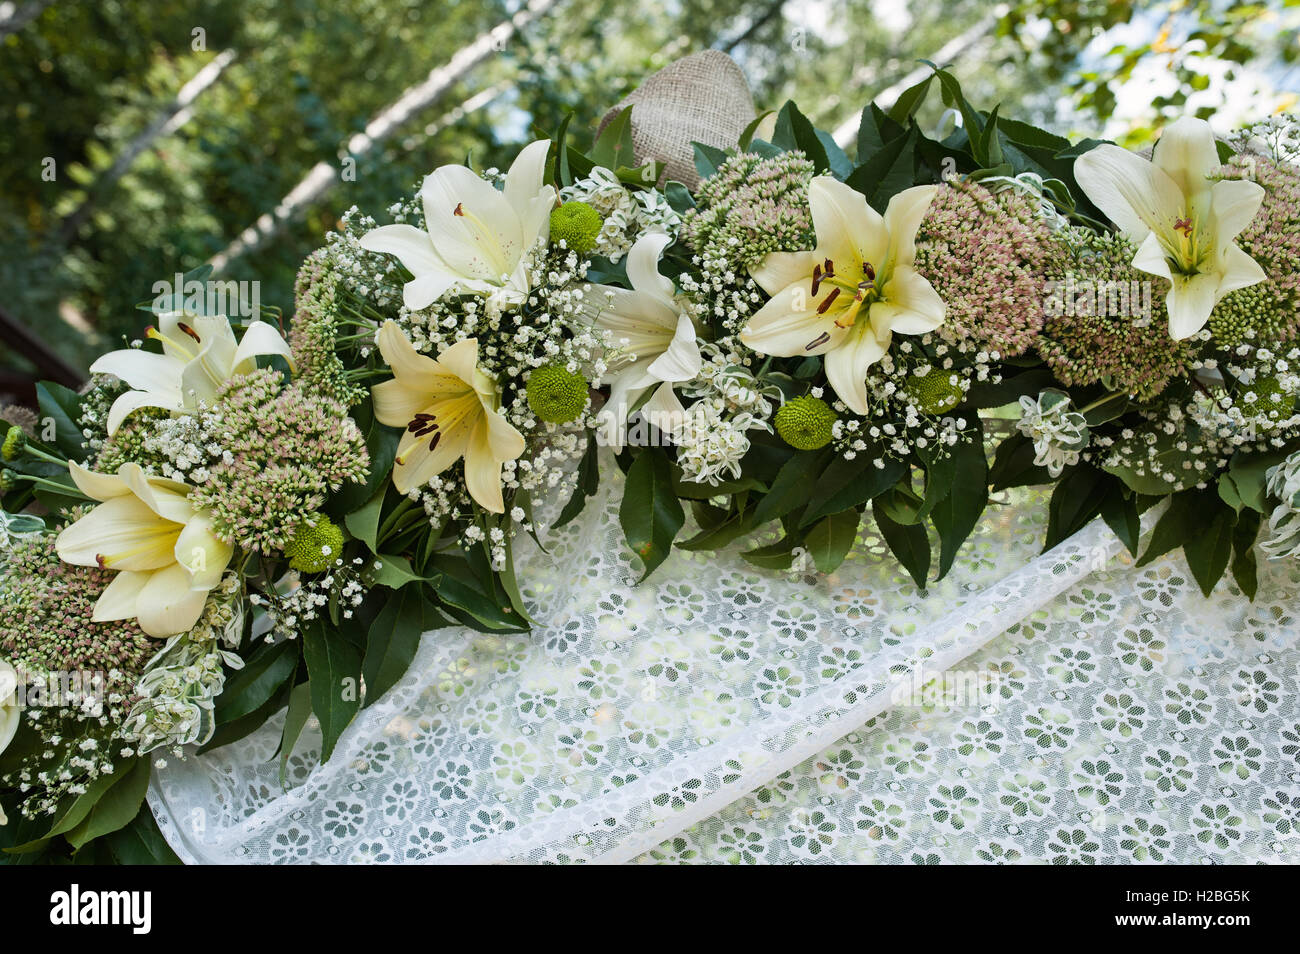 Beautiful wedding arch for marriage decorated with flowers Stock Photo